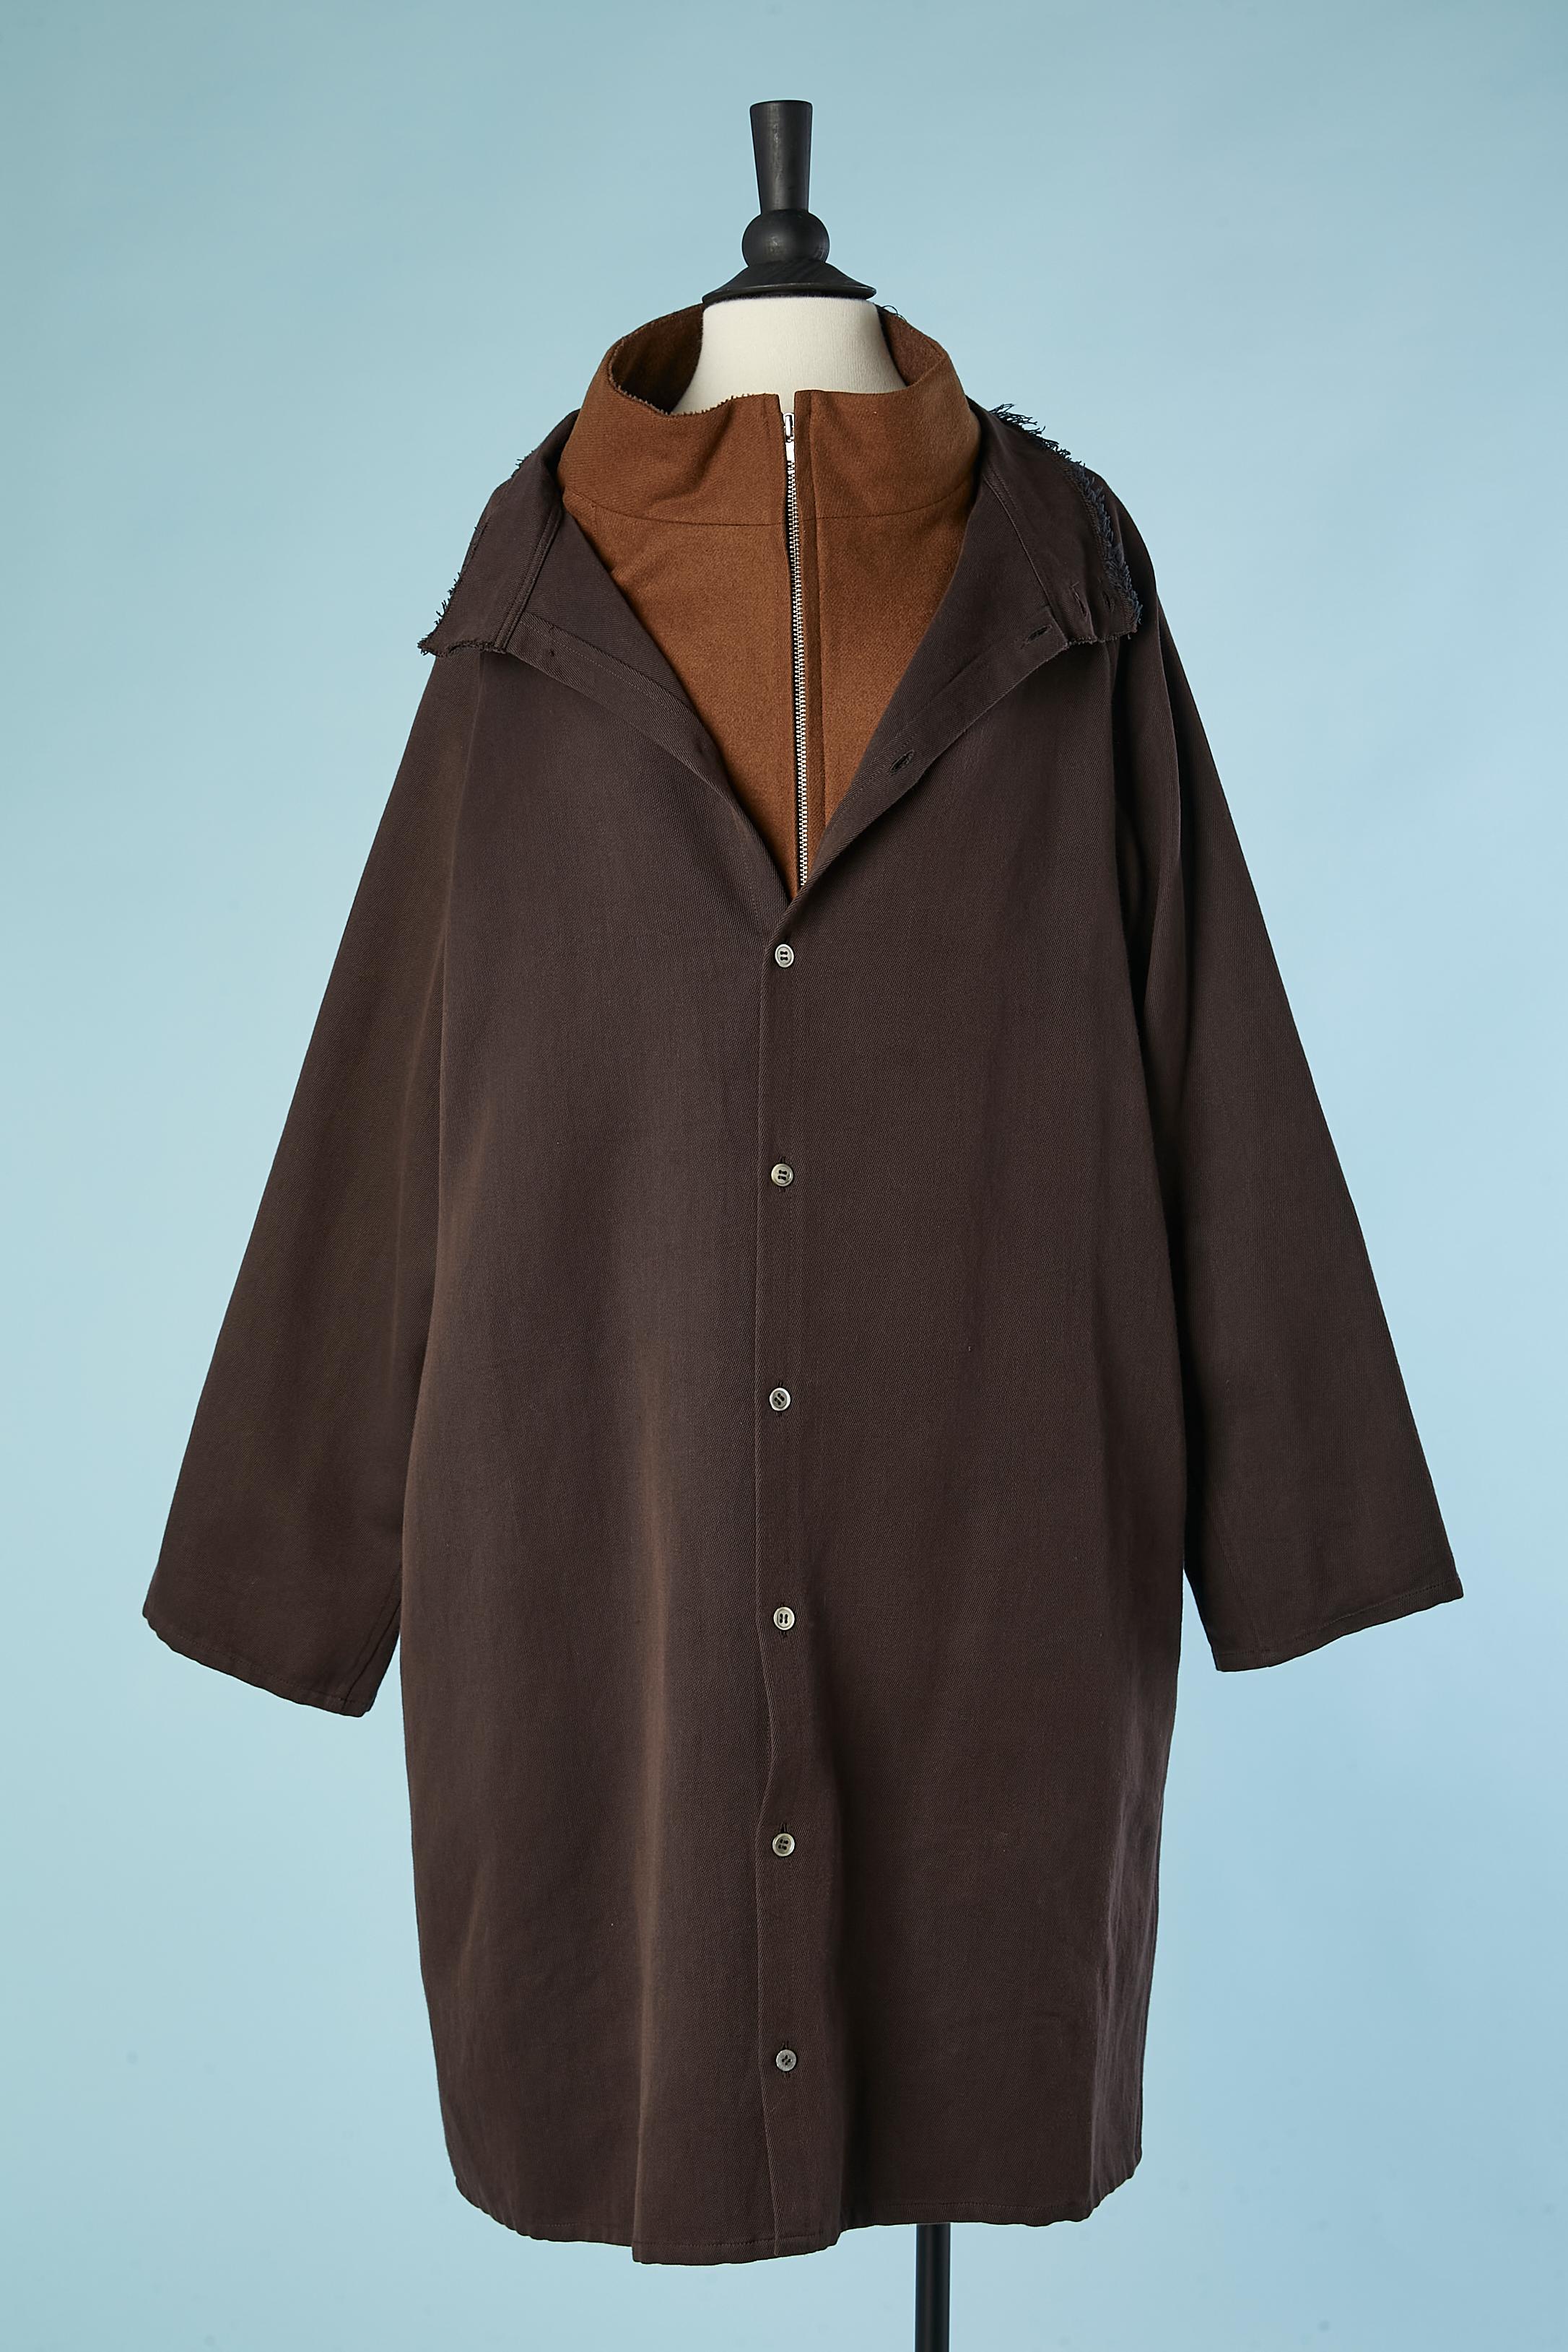 Double-lays coat  made of one in cotton and one in wool. Fabric composition of the top coat : 76% cotton, 24% paper.
Second coat: 90% wool, 10% nylon
The cotton coat is close with mother-of-shell buttons and has raw-cut edge collar + pockets on both